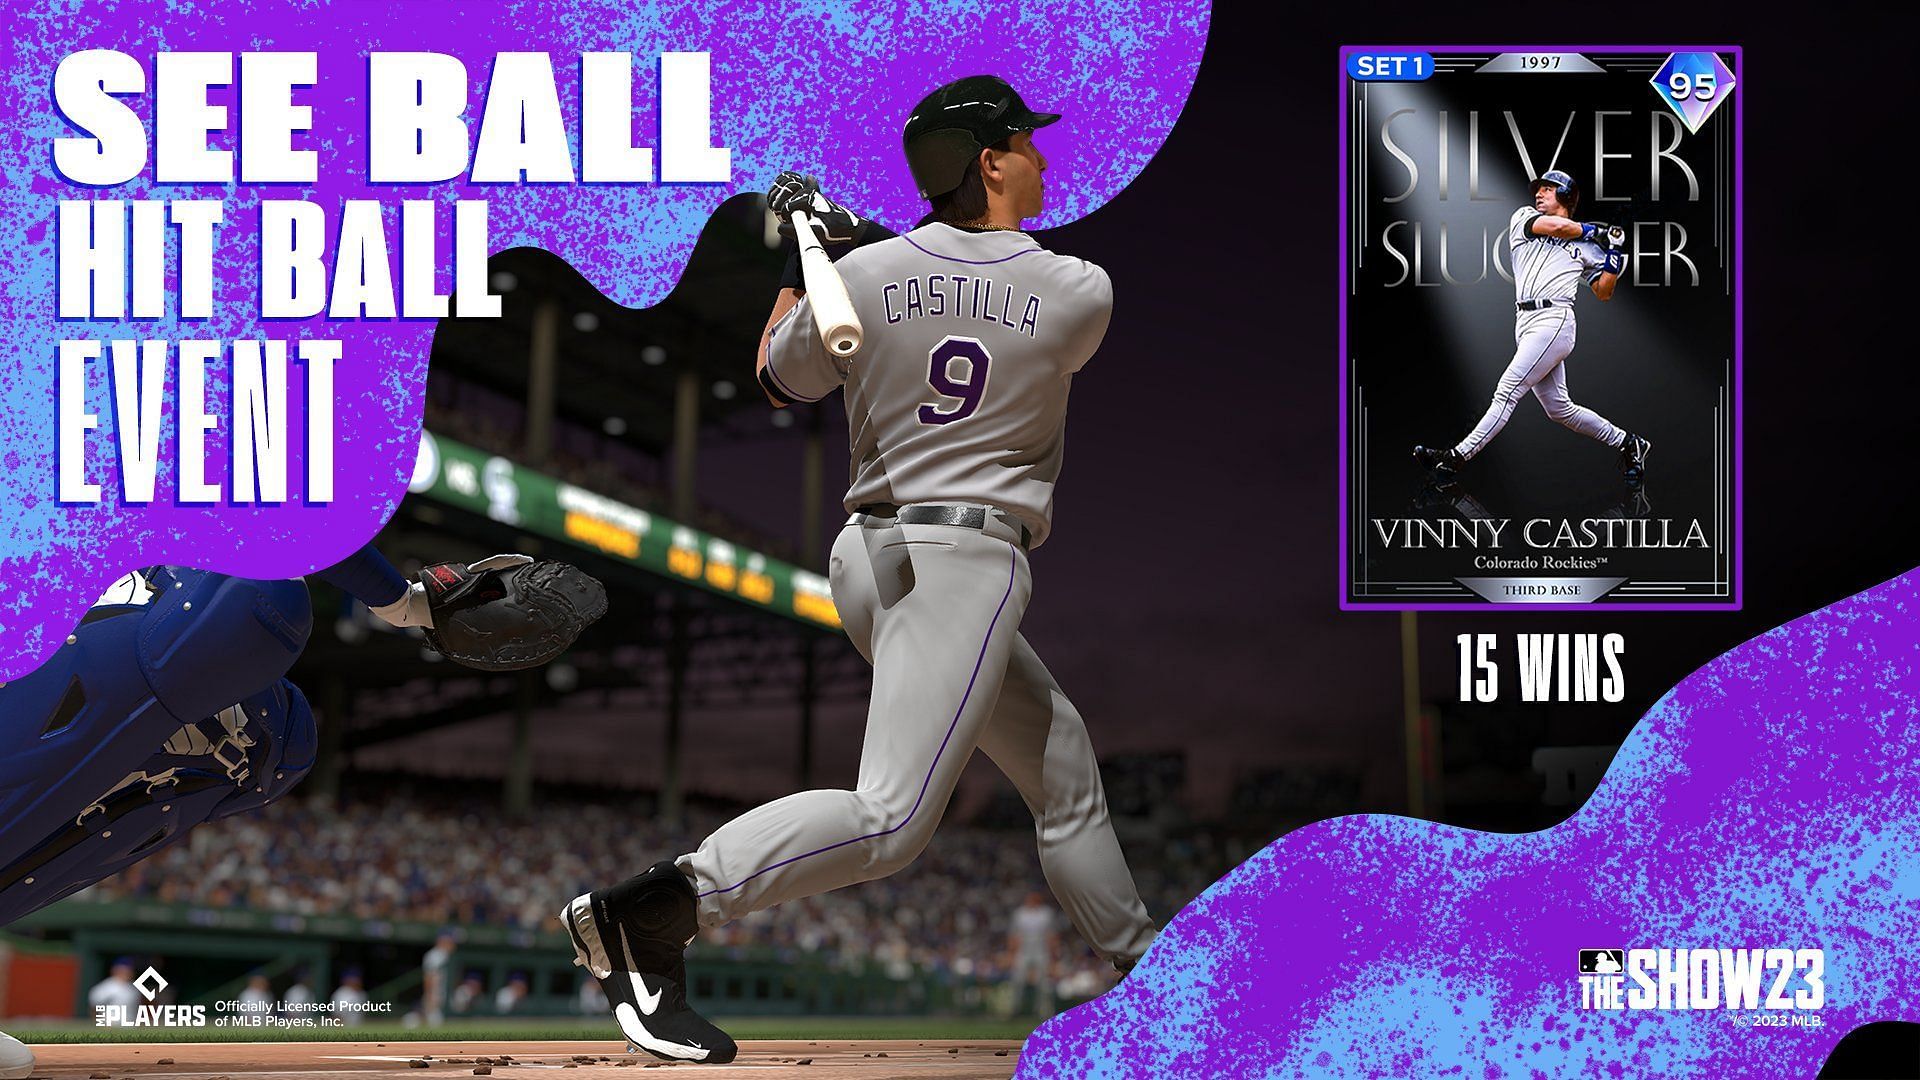 How to get 95-rated Vinny Castilla in MLB The Show 23 for free